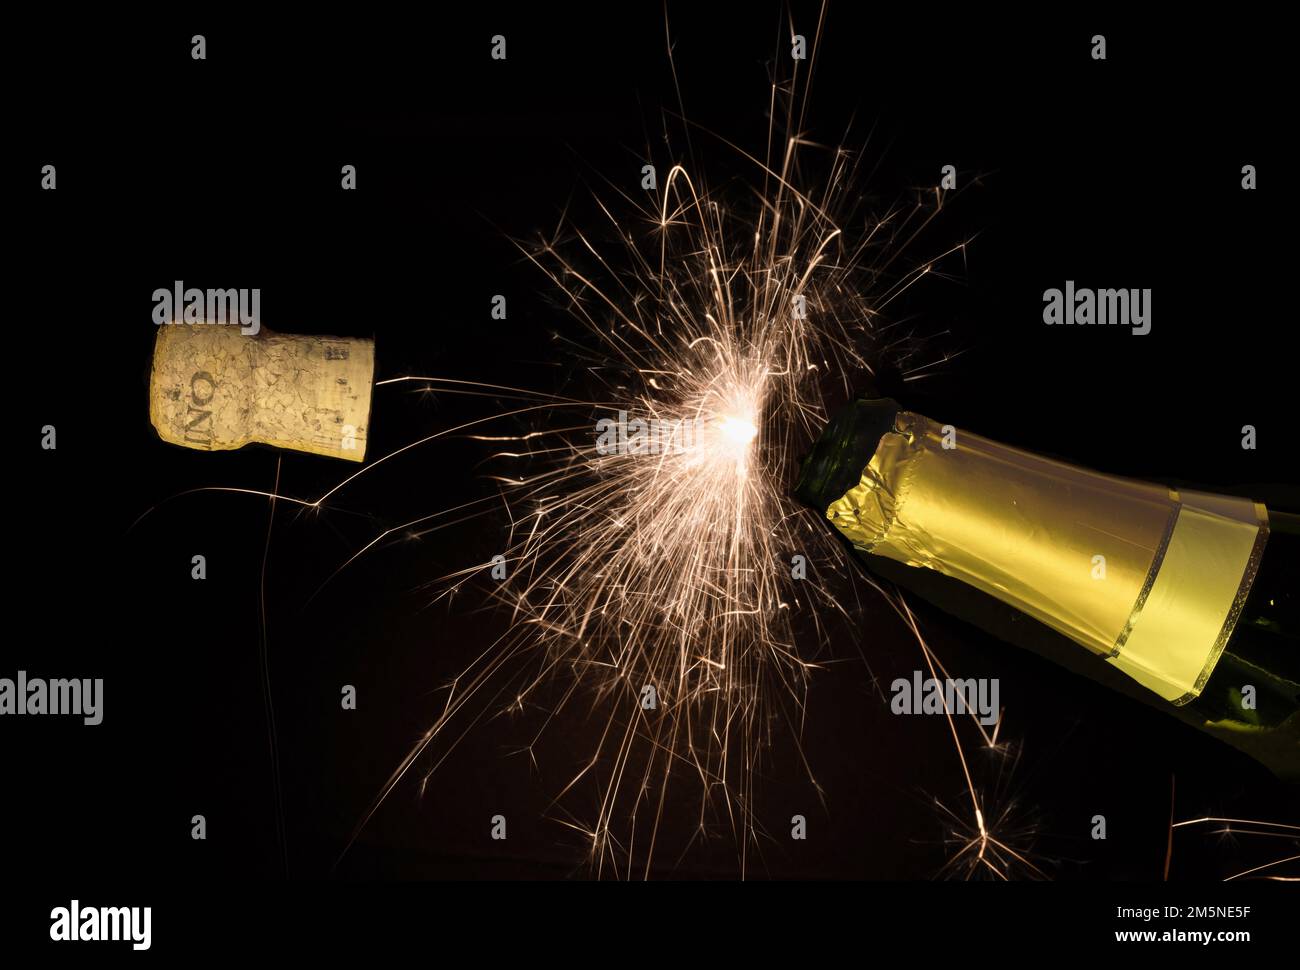 Champagne bottle cork pops on new year's eve Stock Photo